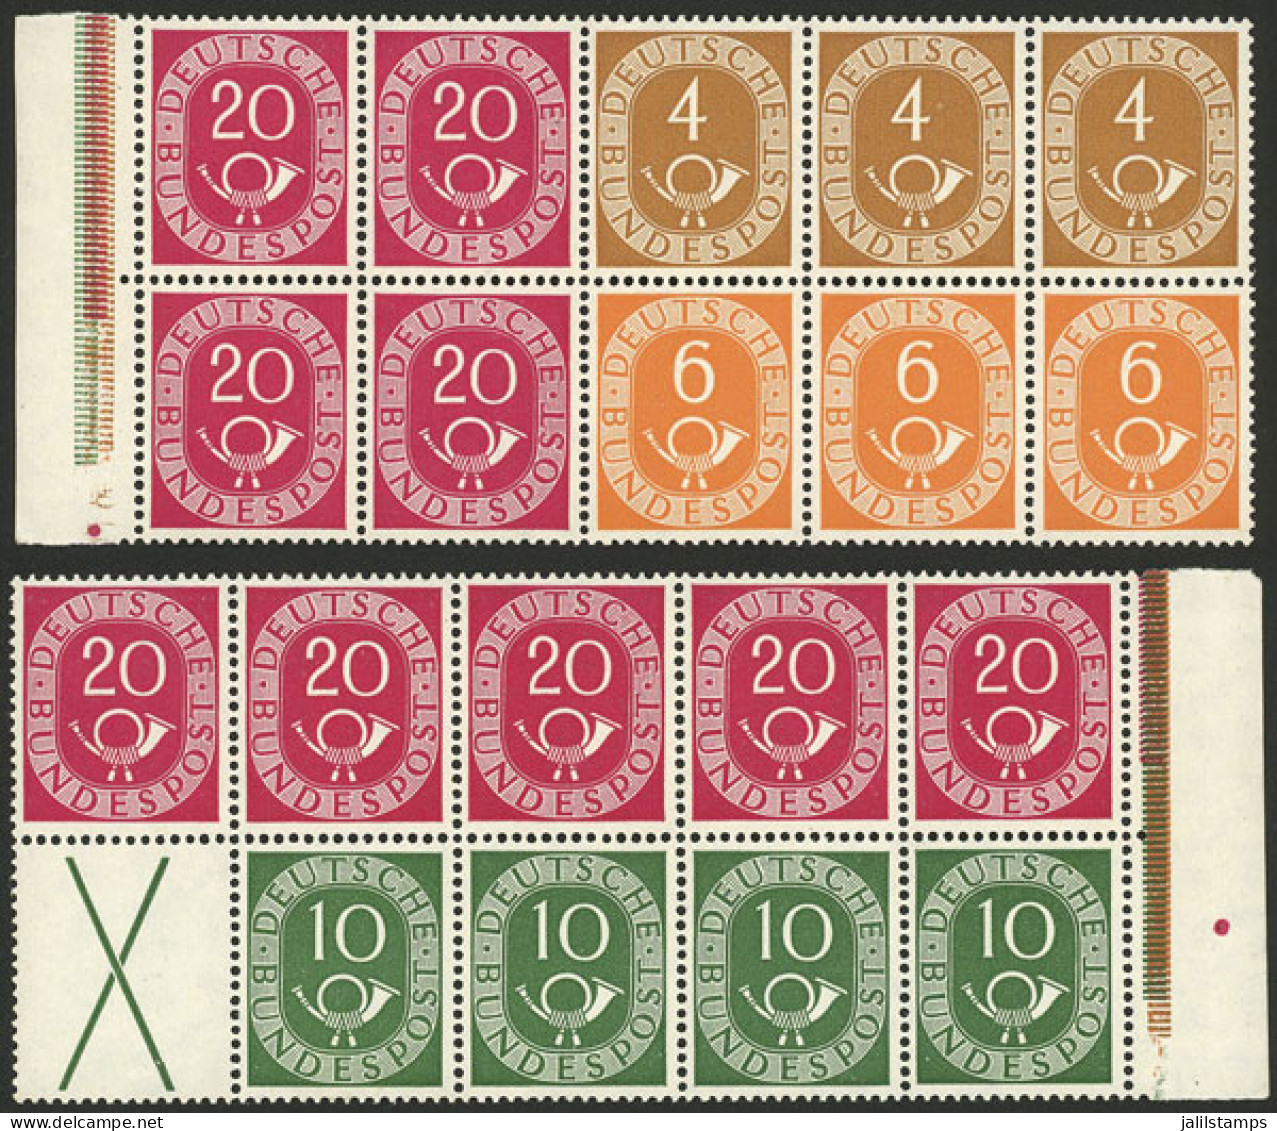 WEST GERMANY: Yvert 10 + Other Values, 1951/2 Post Horn, The 2 Panes Of The Booklet, Mint With Tiny Hinge Marks, Excelle - Neufs